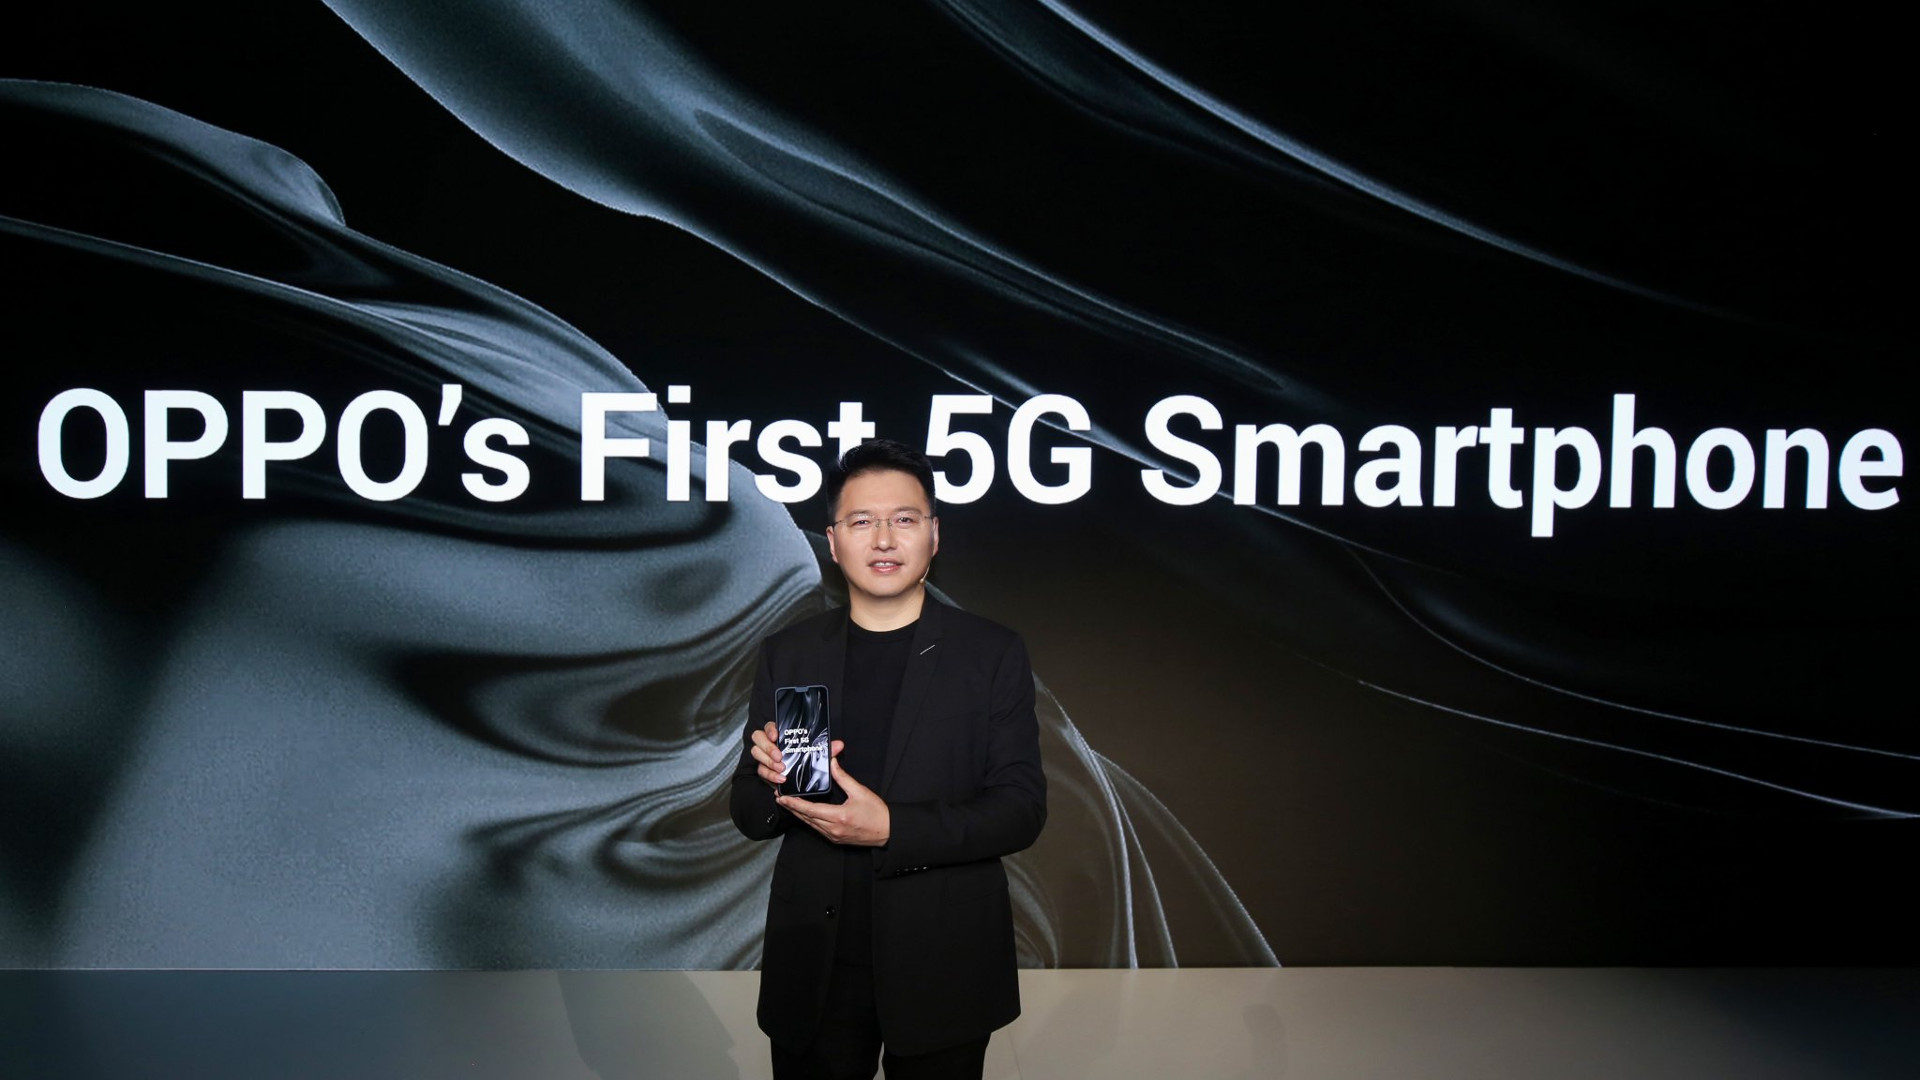 Oppo's first 5G smartphone is revealed.